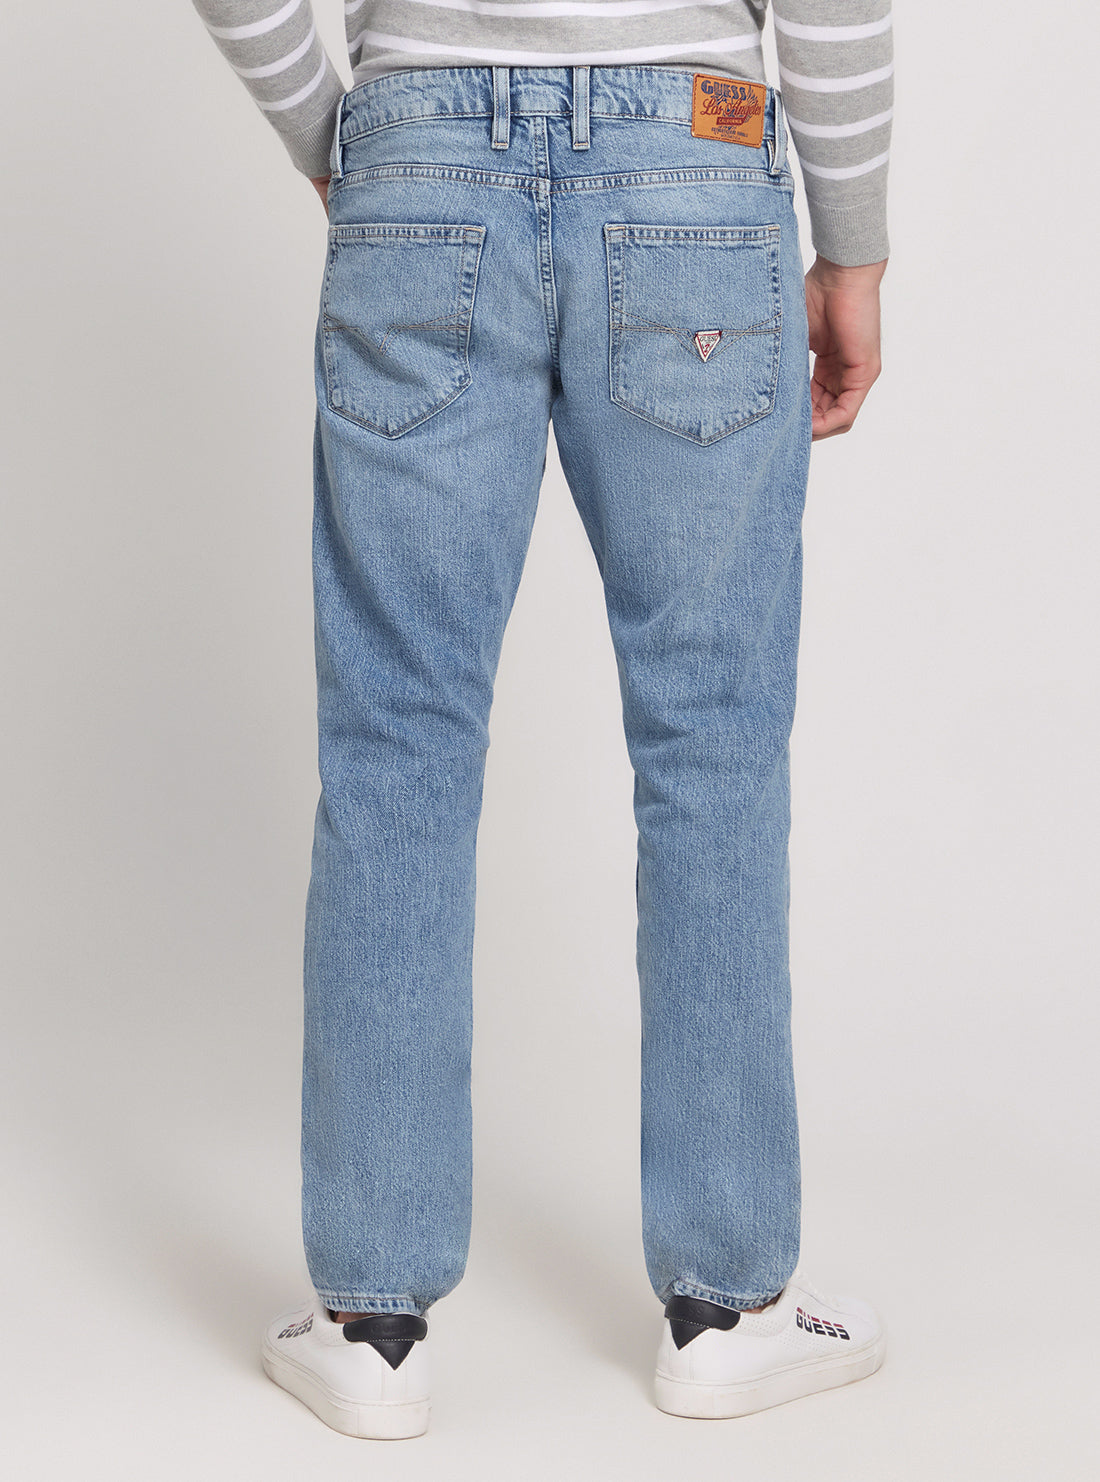 GUESS Low Rise Slim Tapered Denim Jeans in Light Wash back view